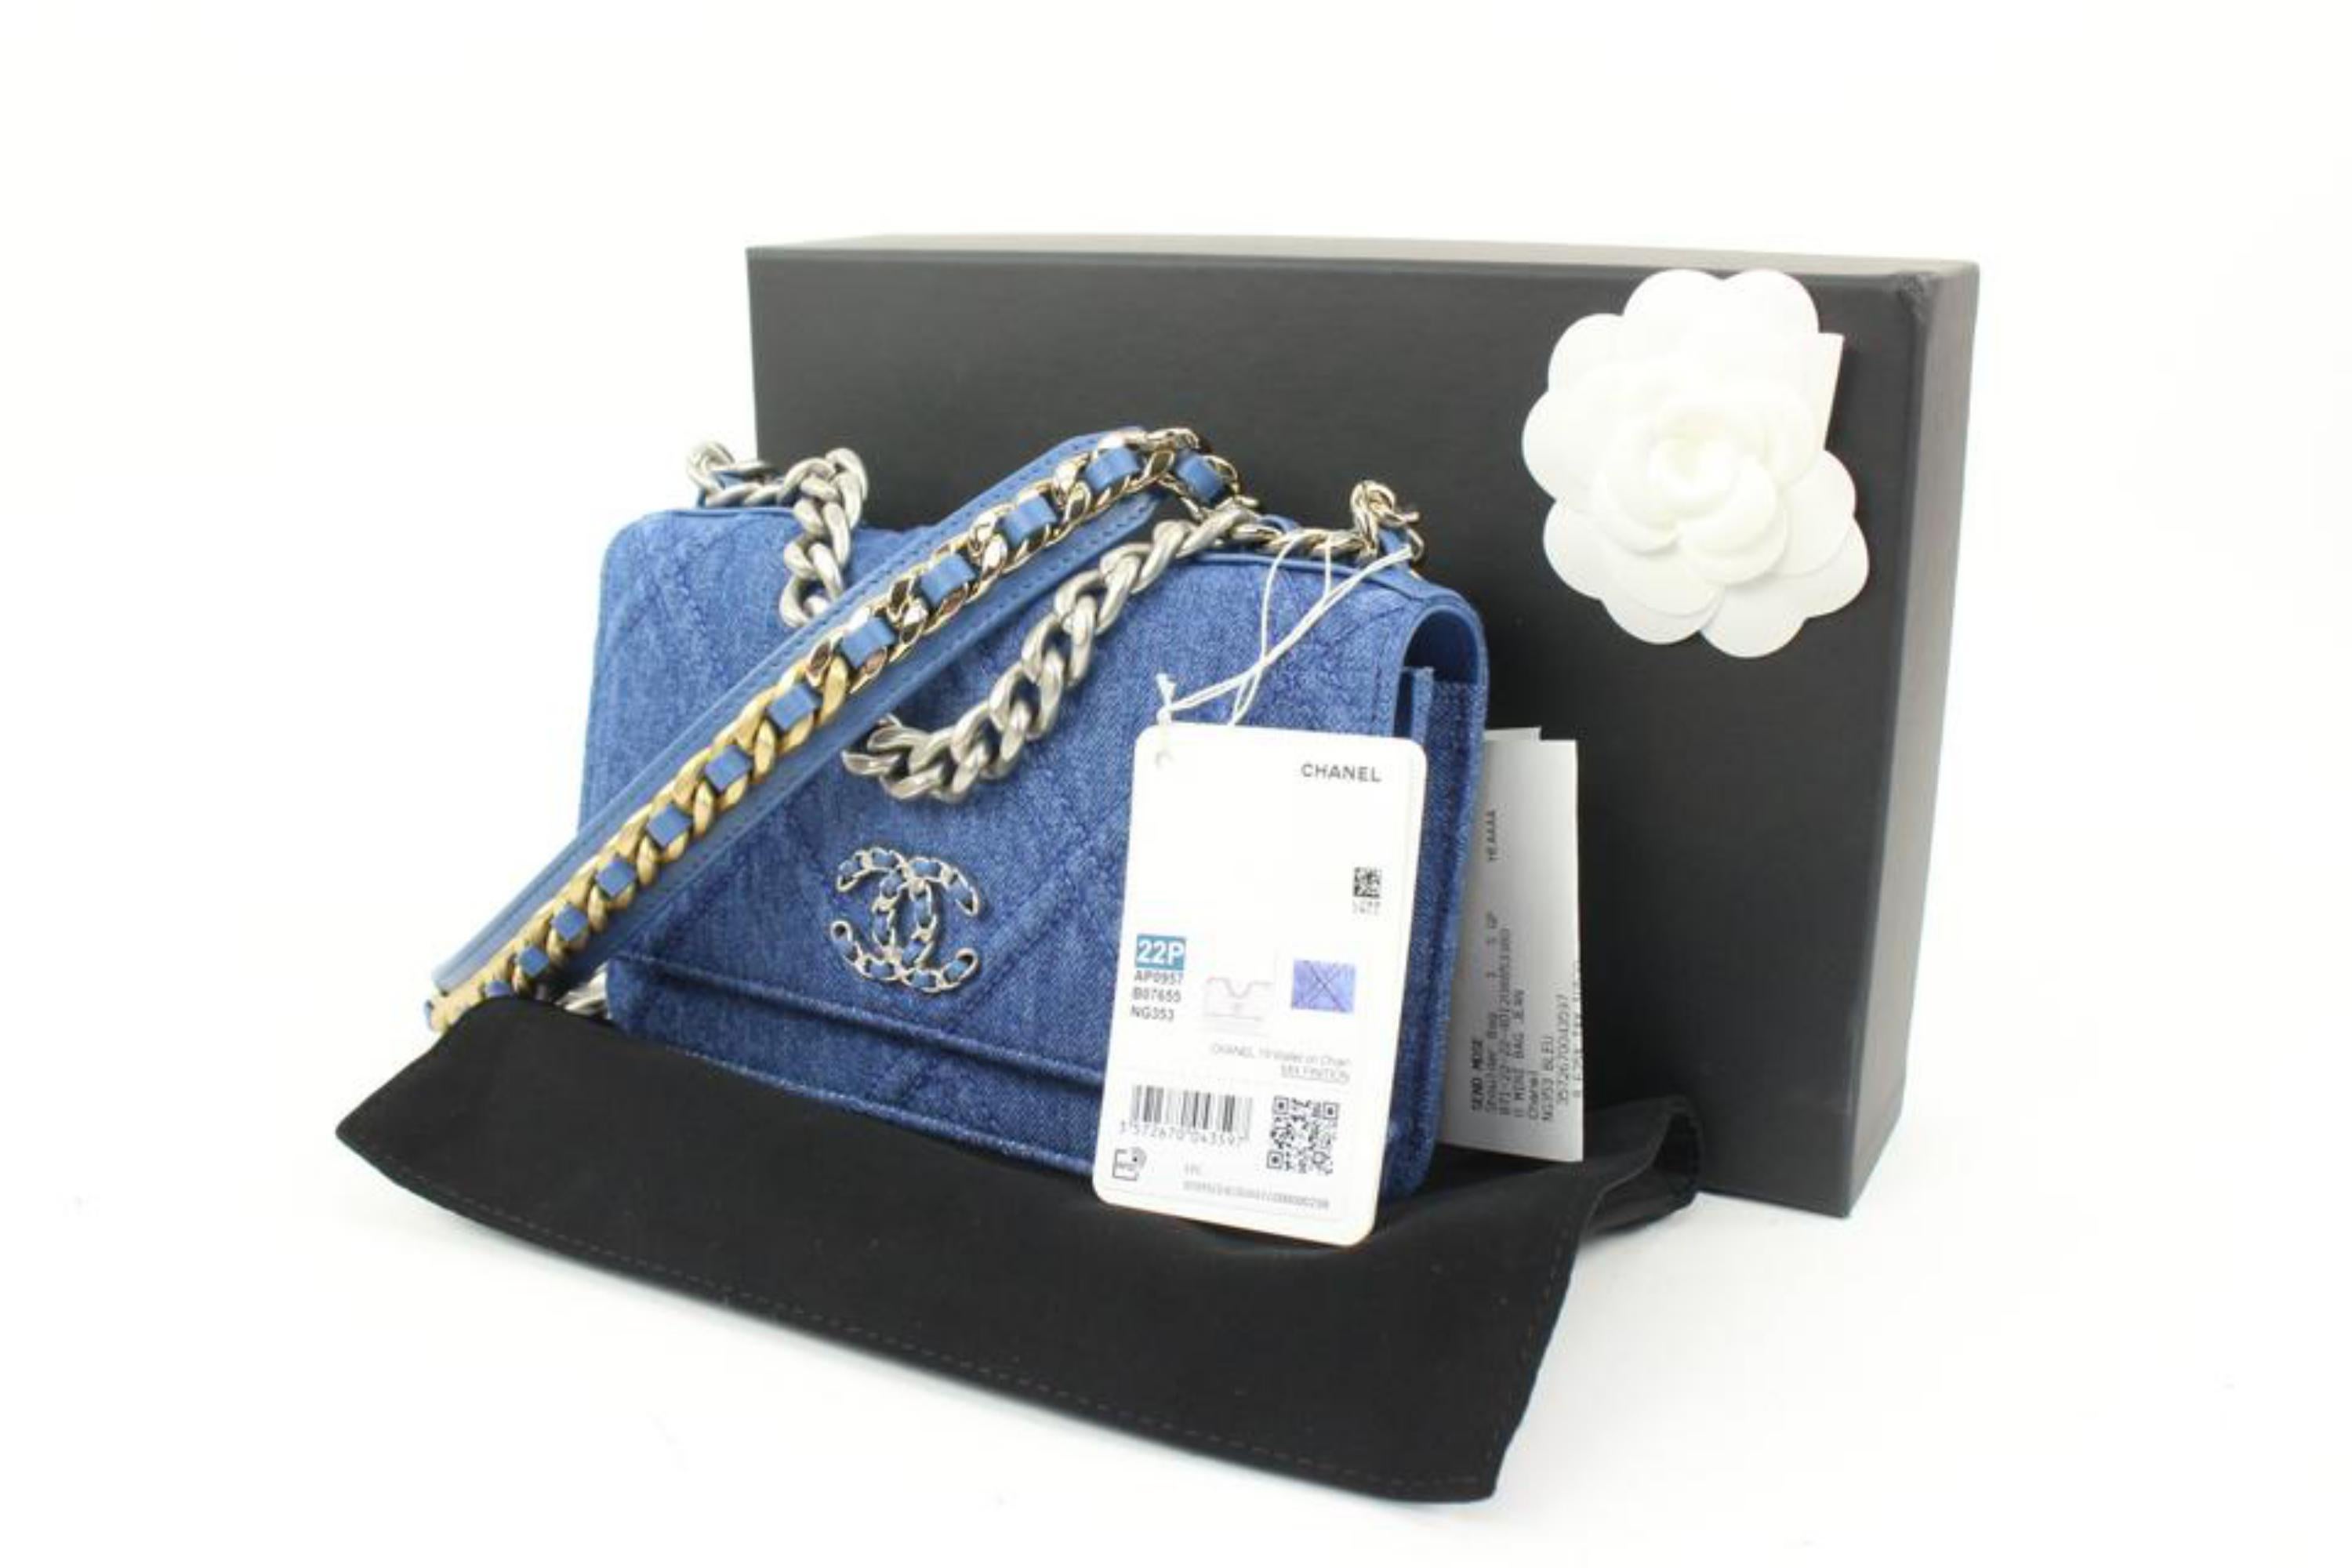 Chanel 22p Bags - 2 For Sale on 1stDibs  chanel 22p bags, 22p chanel,  chanel 22p handbags